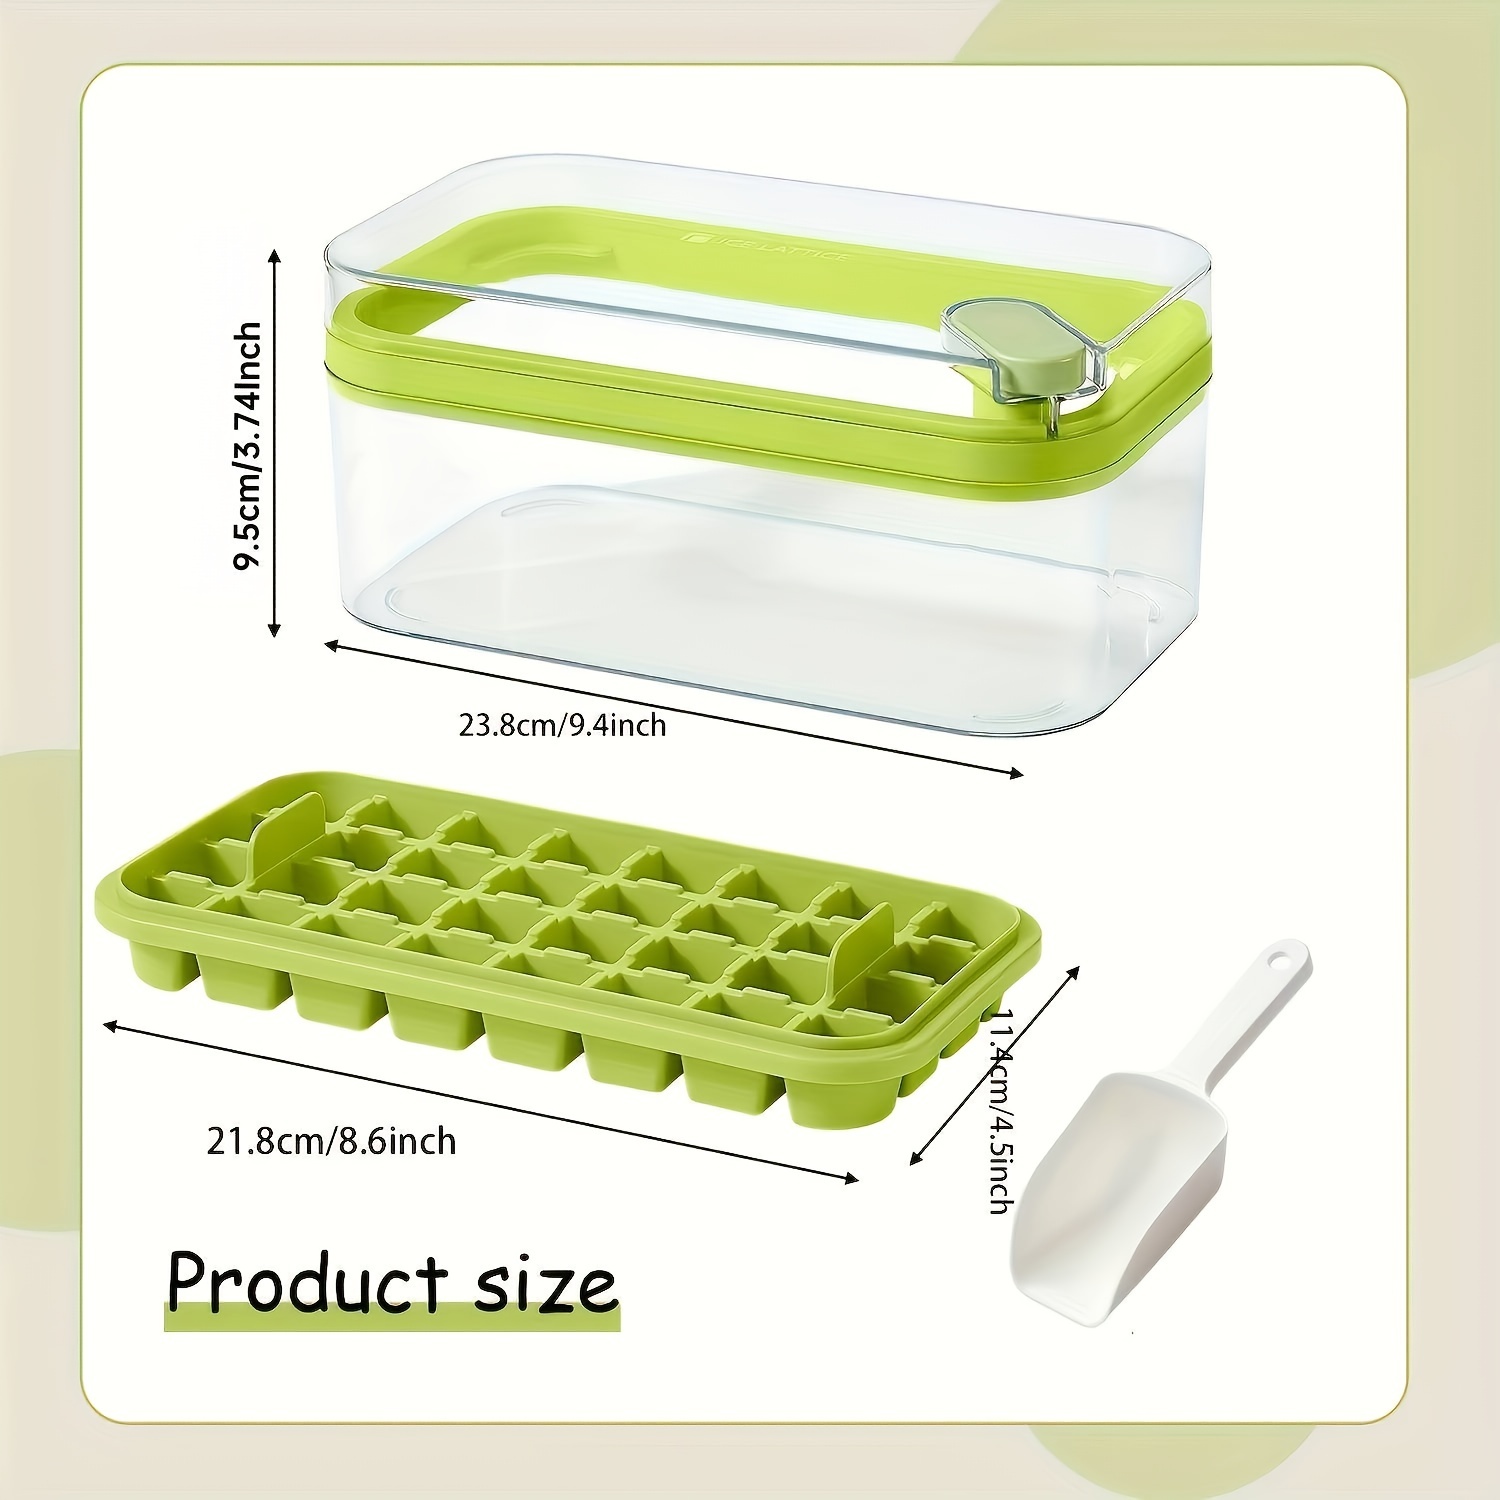 Ice Cube Tray, Large, Pack of 2 - Flexible 8 Cavity Silicone Ice